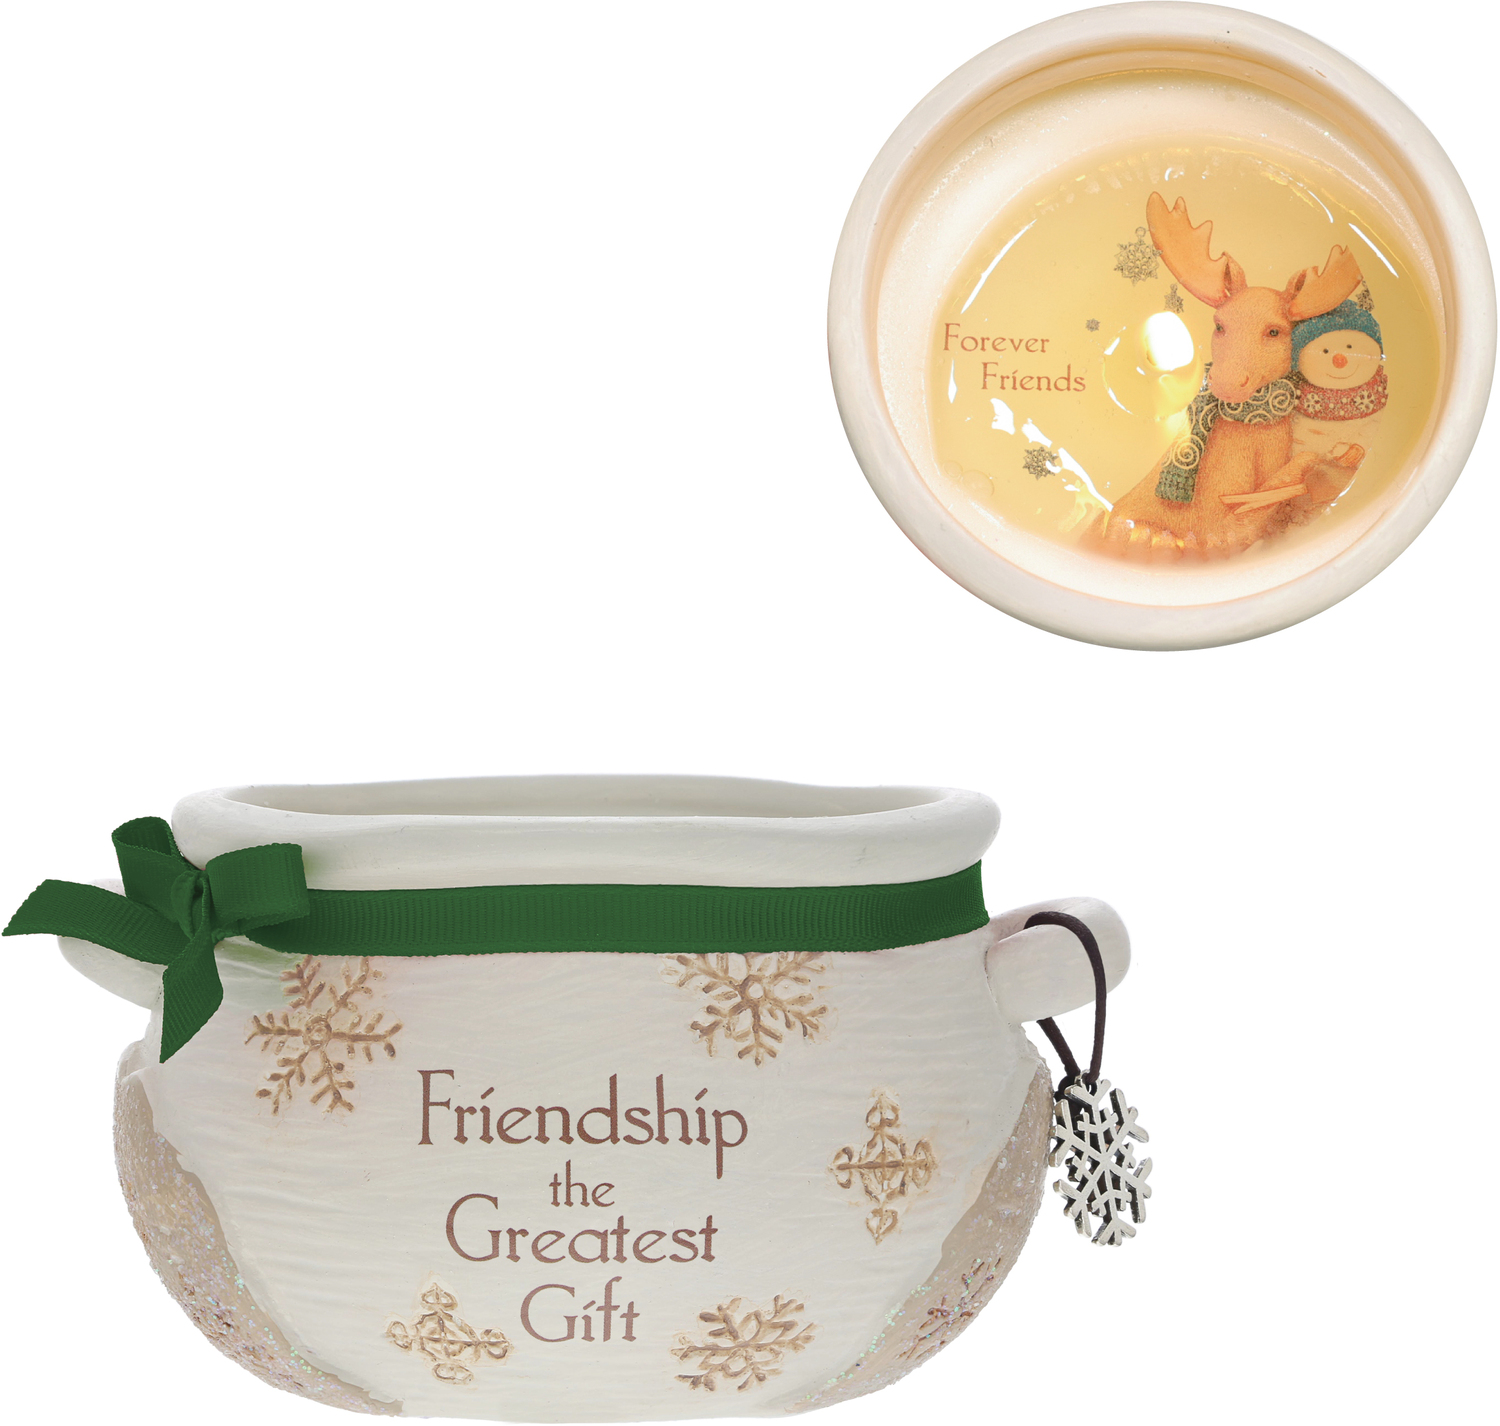 Friendship by The Birchhearts - Friendship - 9 oz - 100% Soy Wax Reveal Candle
Scent: Winter Snow